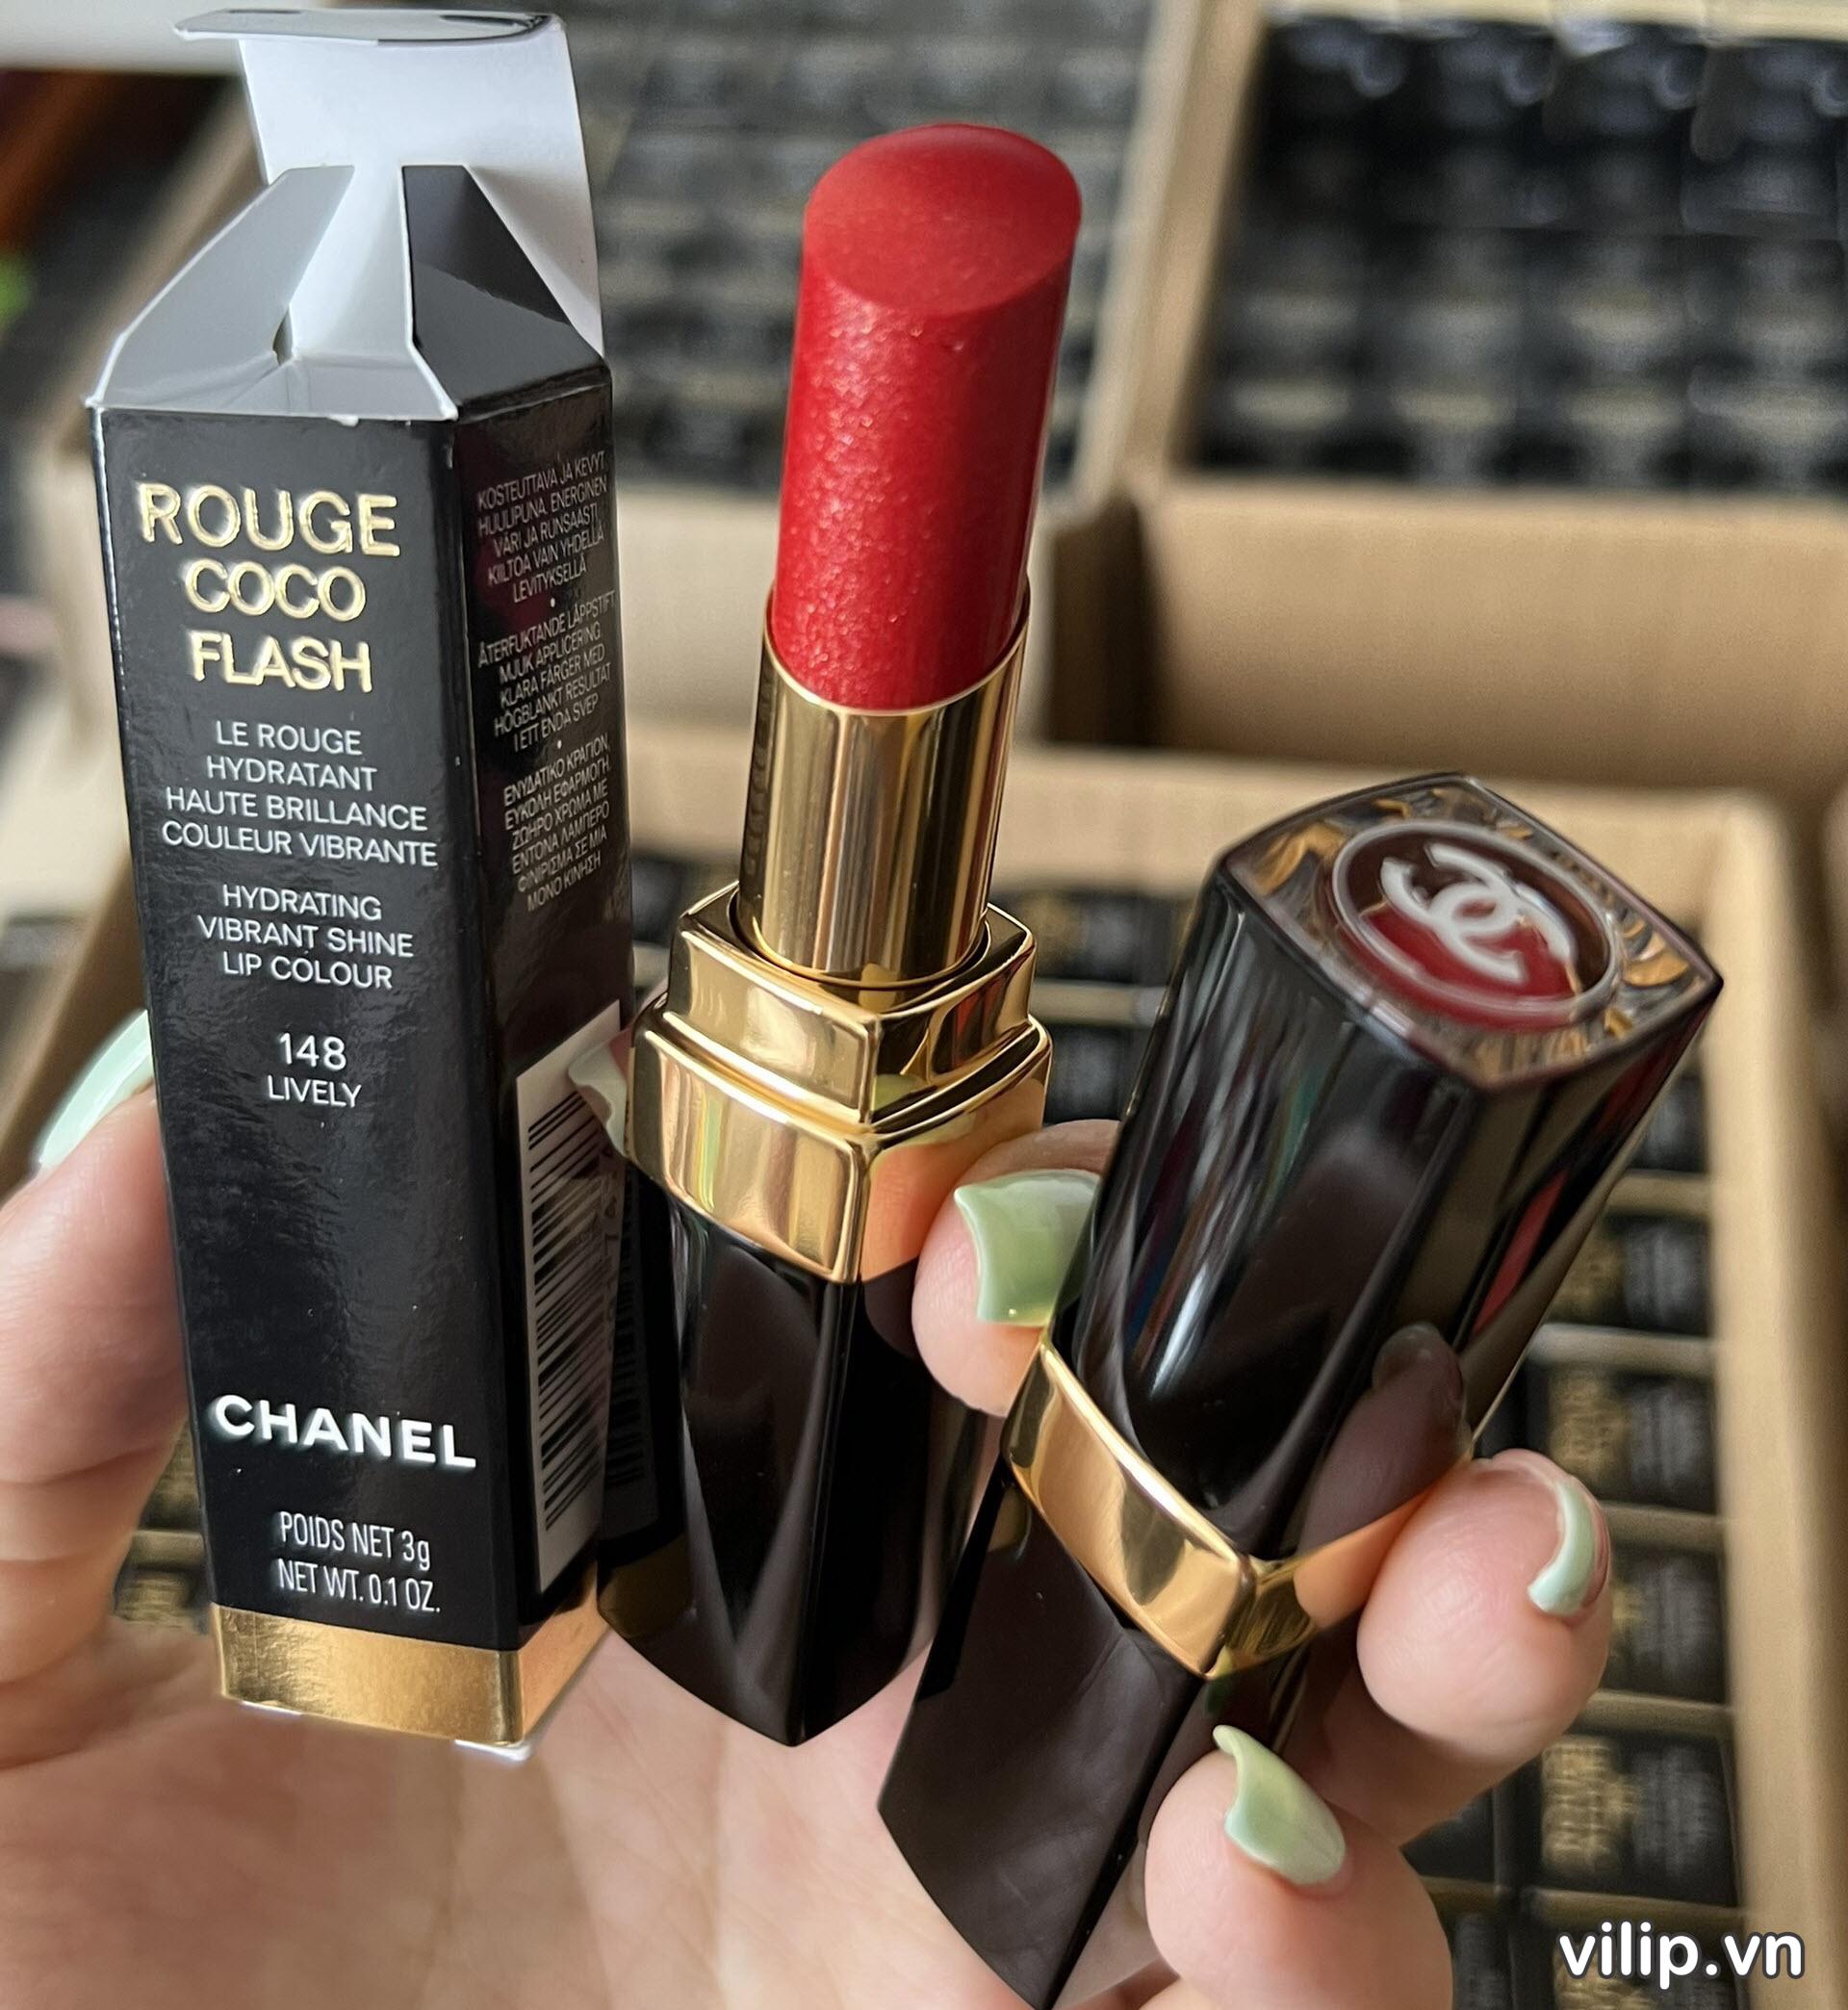 Son Chanel Rouge Coco Flash Hydrating Vibrant Shine Lip Colour 148 Lively 5